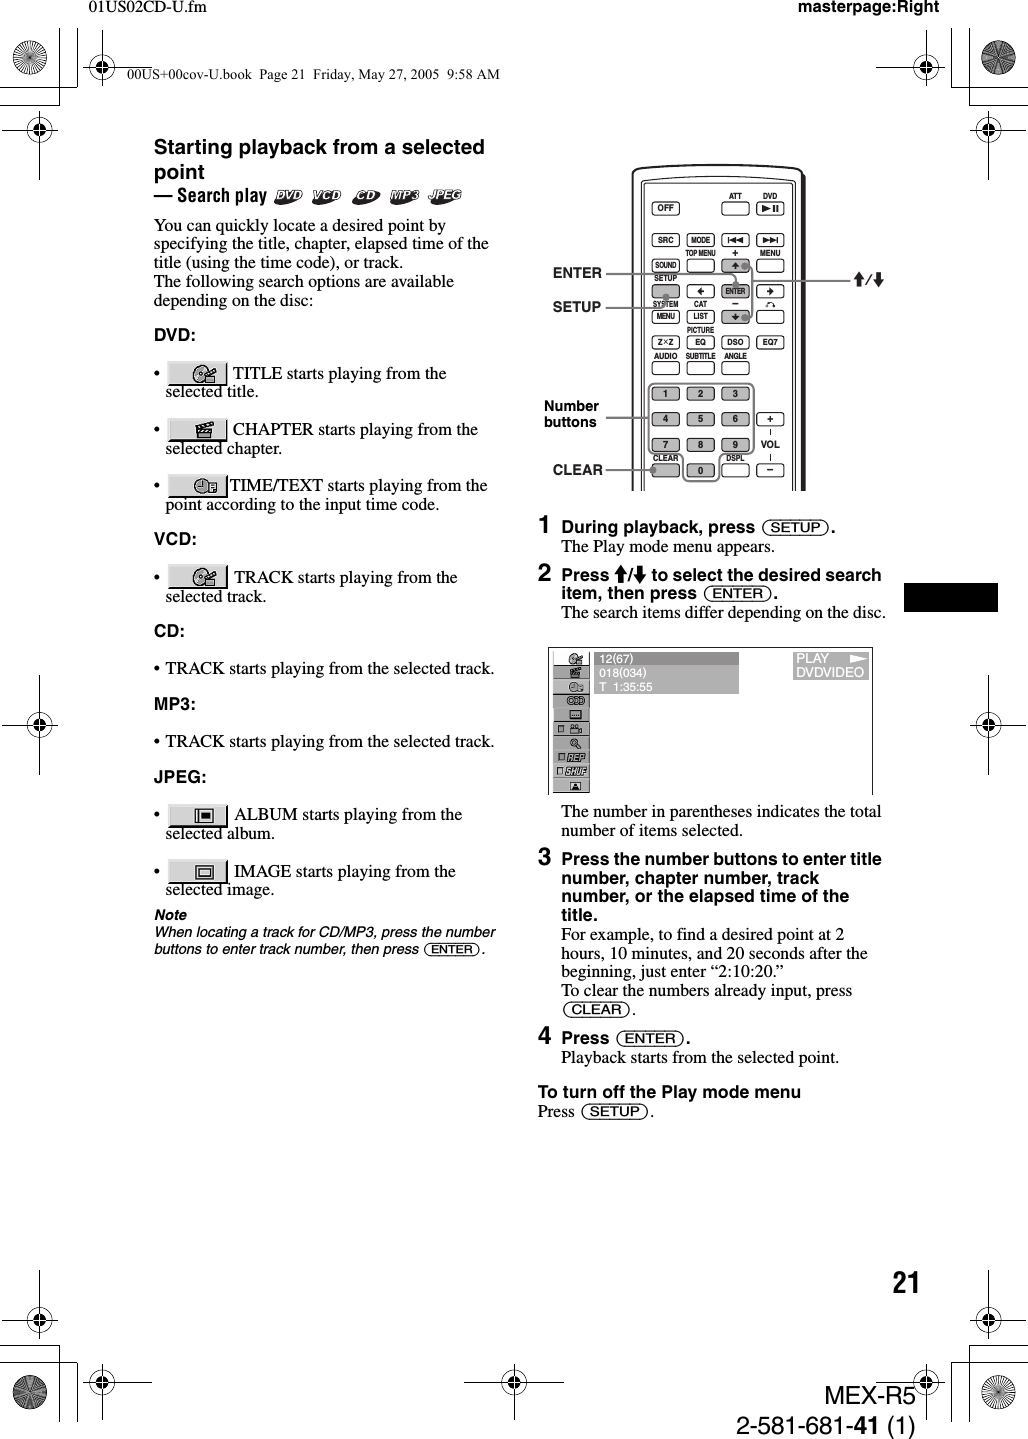 2101US02CD-U.fm masterpage:RightMEX-R52-581-681-41 (1)Starting playback from a selected point— Search play      You can quickly locate a desired point by specifying the title, chapter, elapsed time of the title (using the time code), or track.The following search options are available depending on the disc:DVD:•  TITLE starts playing from the selected title.•  CHAPTER starts playing from the selected chapter.• TIME/TEXT starts playing from the point according to the input time code.VCD:•  TRACK starts playing from the selected track.CD:• TRACK starts playing from the selected track.MP3:• TRACK starts playing from the selected track.JPEG:•  ALBUM starts playing from the selected album.•  IMAGE starts playing from the selected image.NoteWhen locating a track for CD/MP3, press the number buttons to enter track number, then press (ENTER).1During playback, press (SETUP).The Play mode menu appears.2Press M/m to select the desired search item, then press (ENTER).The search items differ depending on the disc.The number in parentheses indicates the total number of items selected.3Press the number buttons to enter title number, chapter number, track number, or the elapsed time of the title.For example, to find a desired point at 2 hours, 10 minutes, and 20 seconds after the beginning, just enter “2:10:20.”To clear the numbers already input, press (CLEAR).4Press (ENTER).Playback starts from the selected point.To turn off the Play mode menuPress (SETUP).SRCMODEATT DVDSOUNDTOP MENUMENUSETUPENTERSYSTEMMENU LISTCATEQZ × Z DSO EQ7PICTUREAUDIOSUBTITLEANGLECLEAR1234567890DSPLOFF+–VOL+–ENTERSETUPM/mCLEARNumber buttons12(67)018(034)T  1:35:551PLAYDVDVIDEO00US+00cov-U.book  Page 21  Friday, May 27, 2005  9:58 AM